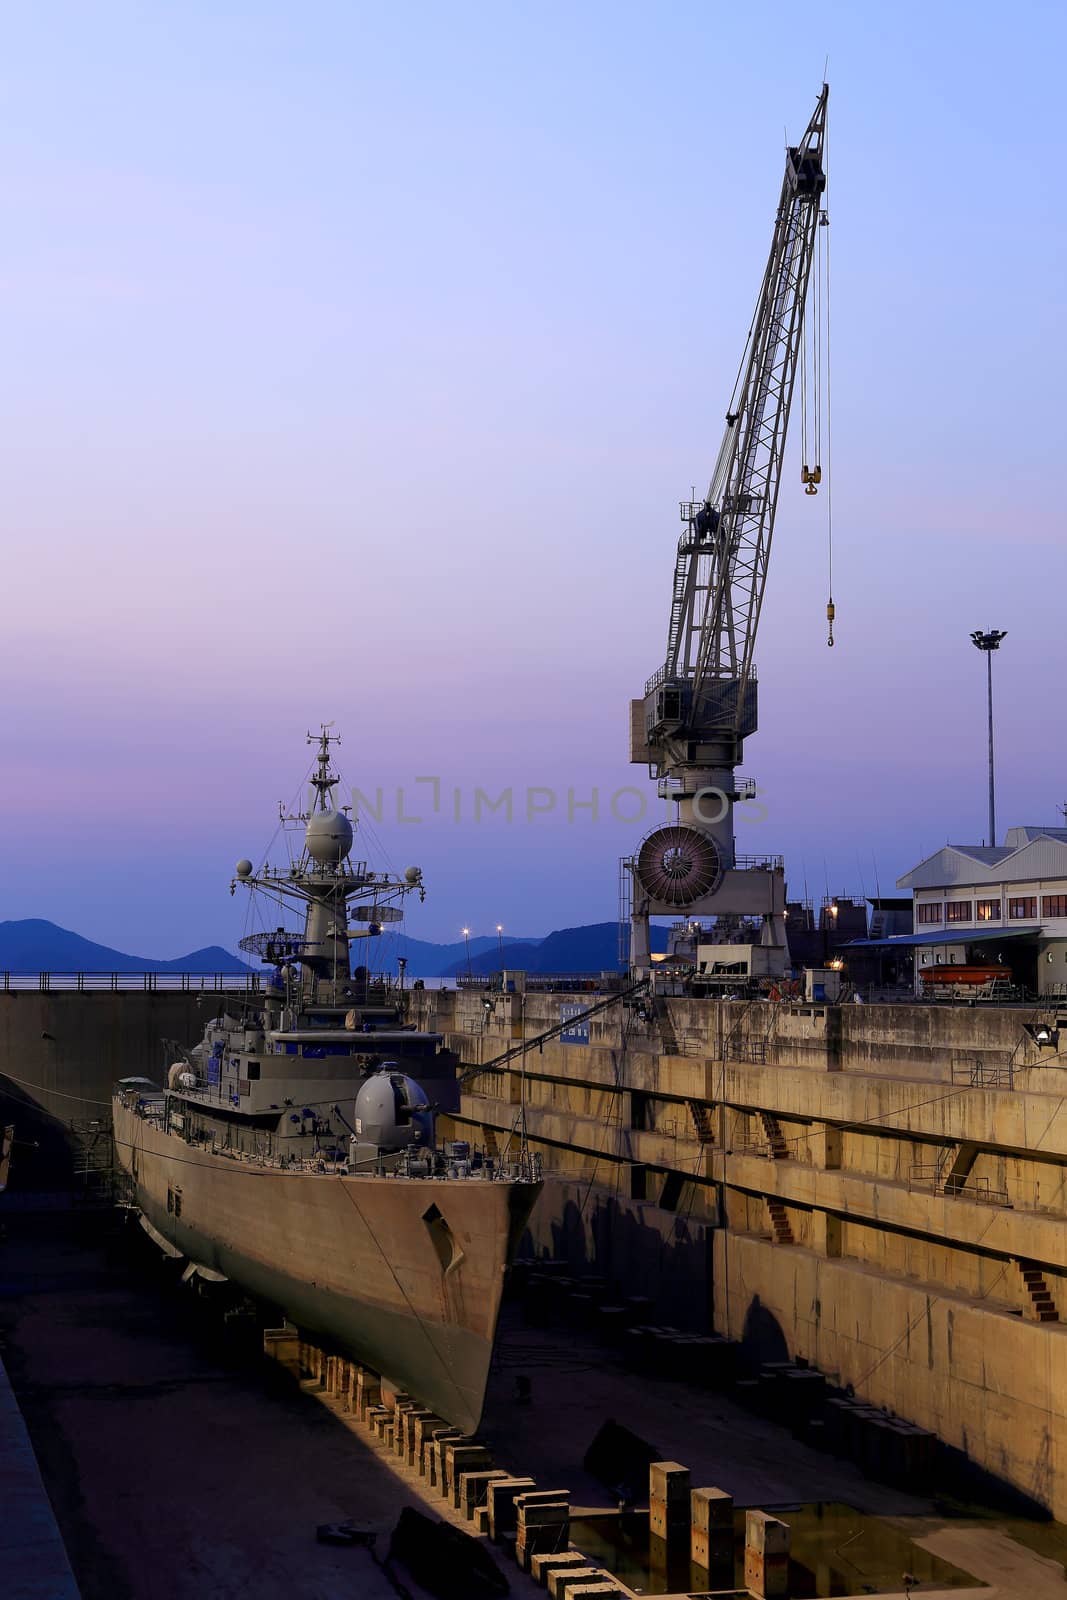 Crane near a covered dry dock at the shipyard by rufous